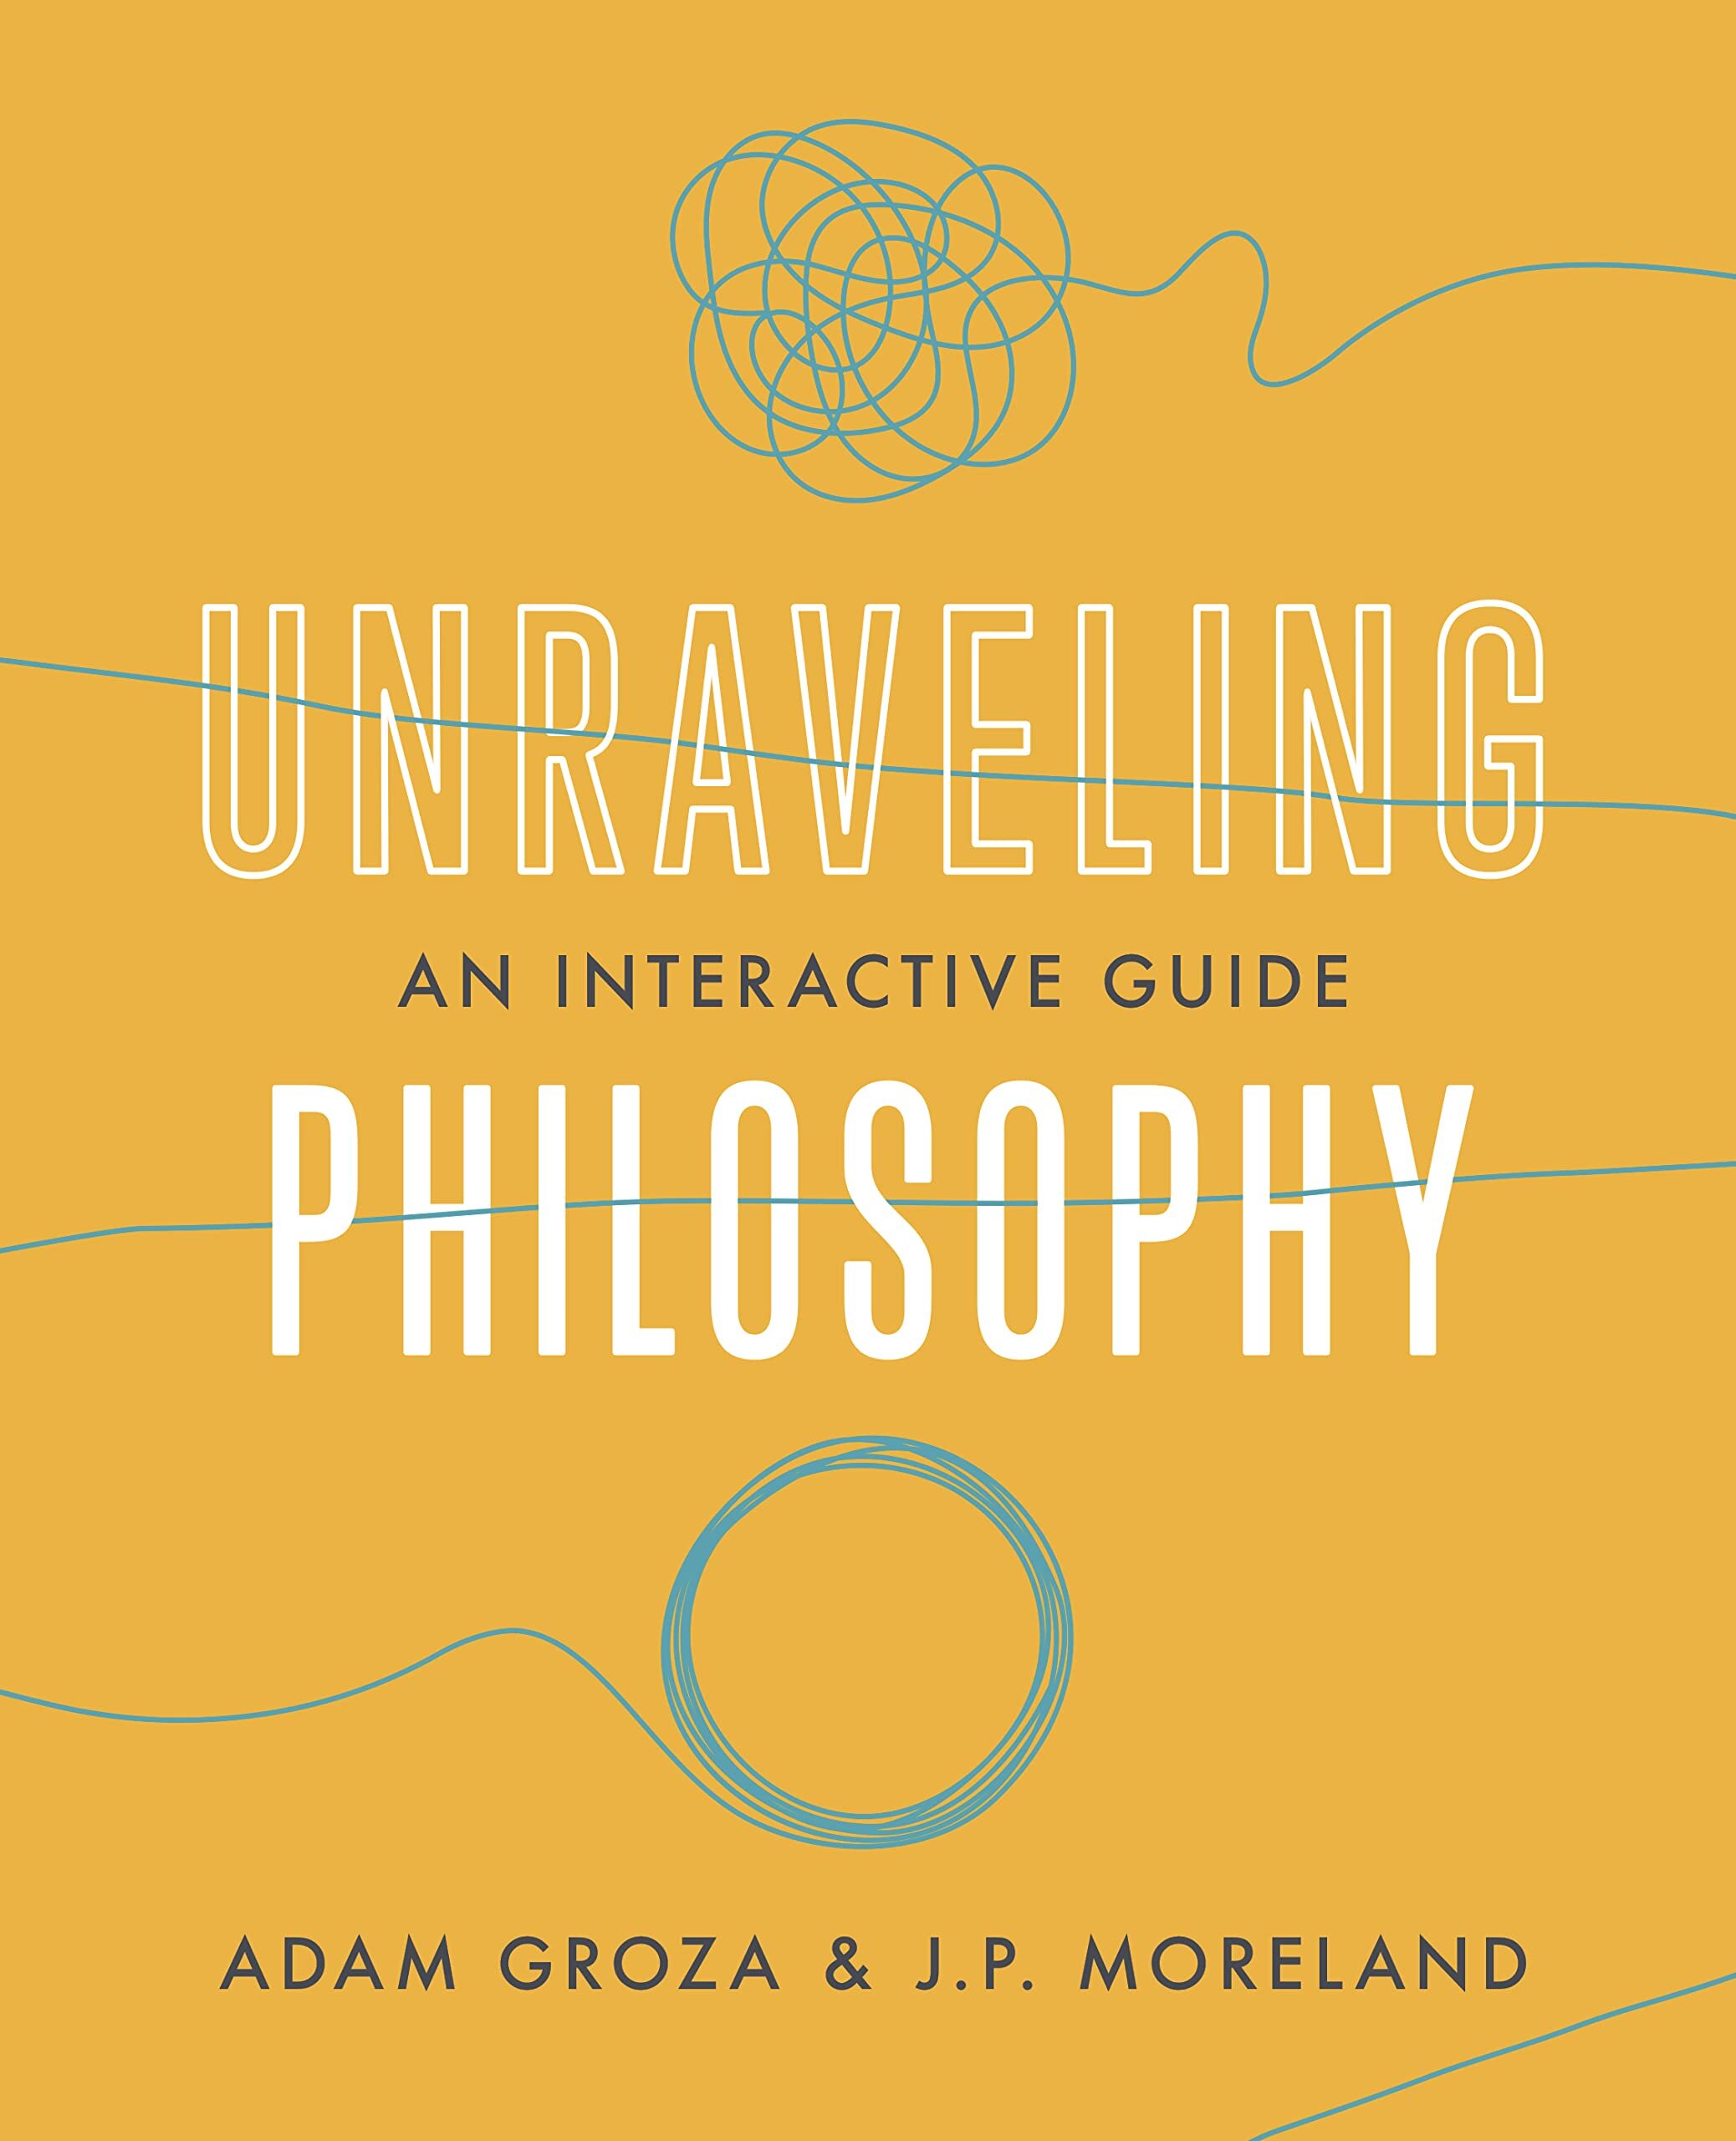 Unraveling Philosophy: An Interactive Guide